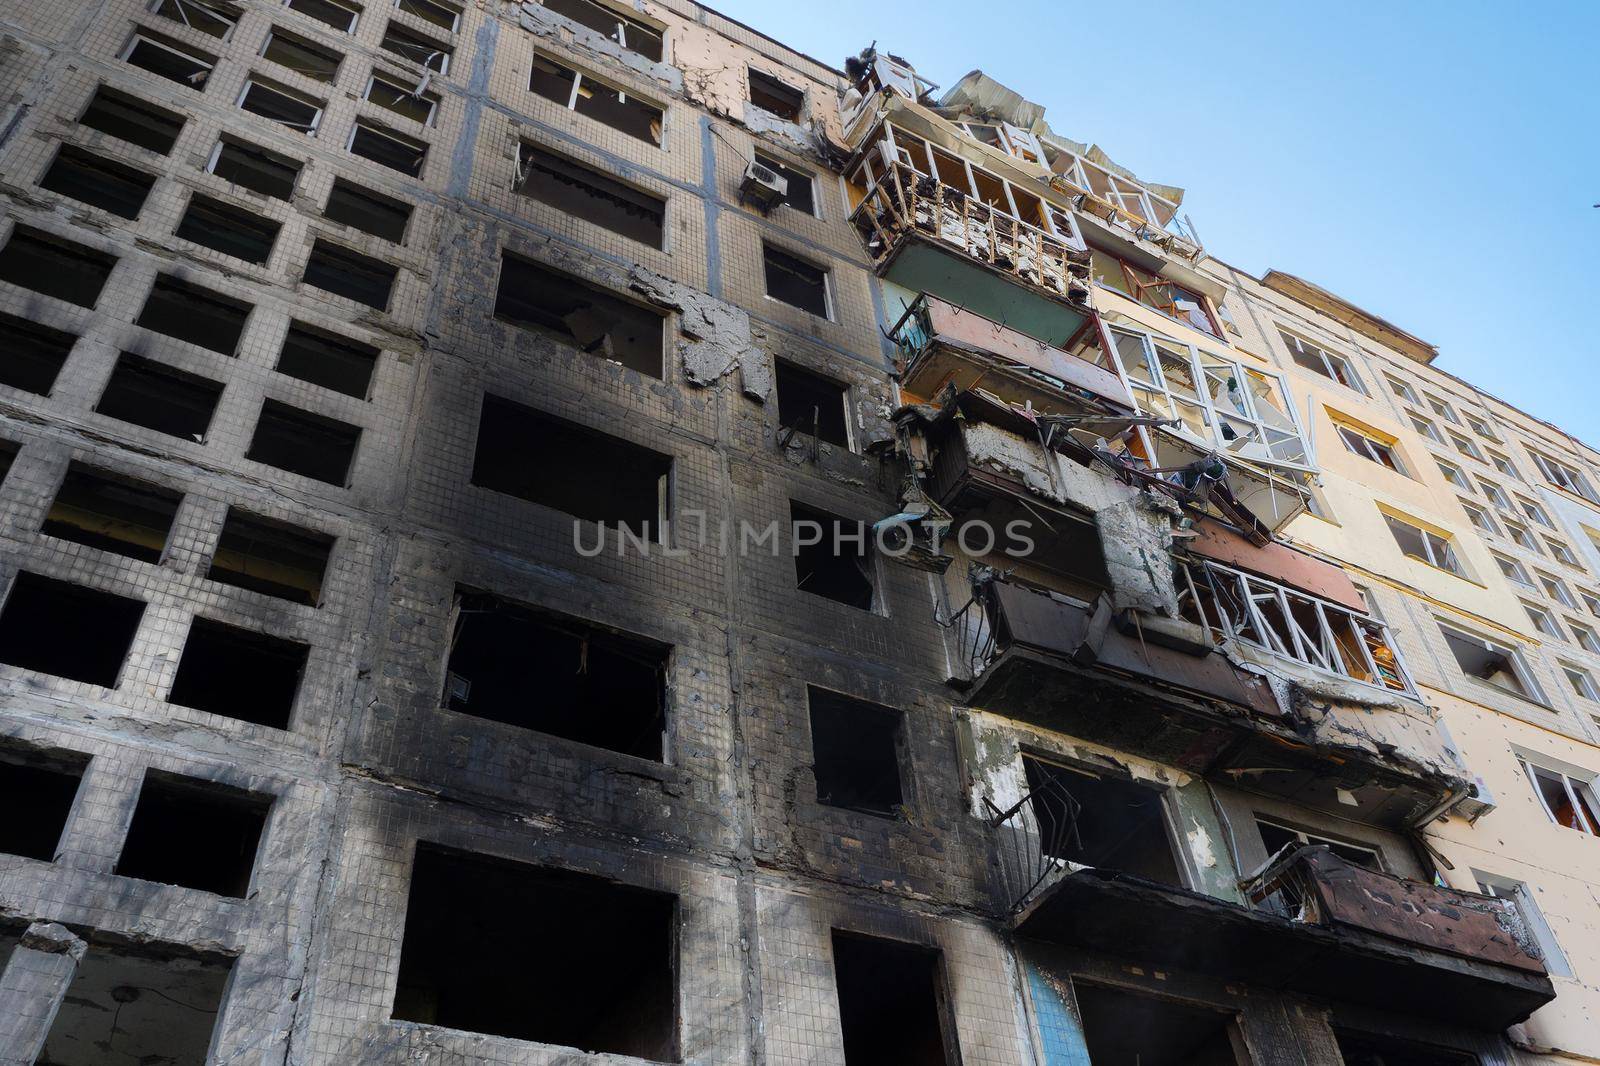 Rocket bomb attack Russia against Ukraine war destruction building ruins city destroyed Mariupol damaged Kyiv ruined. 2022 Russian invasion of Ukraine bombed building destroyed Ukraine Russian fired by synel